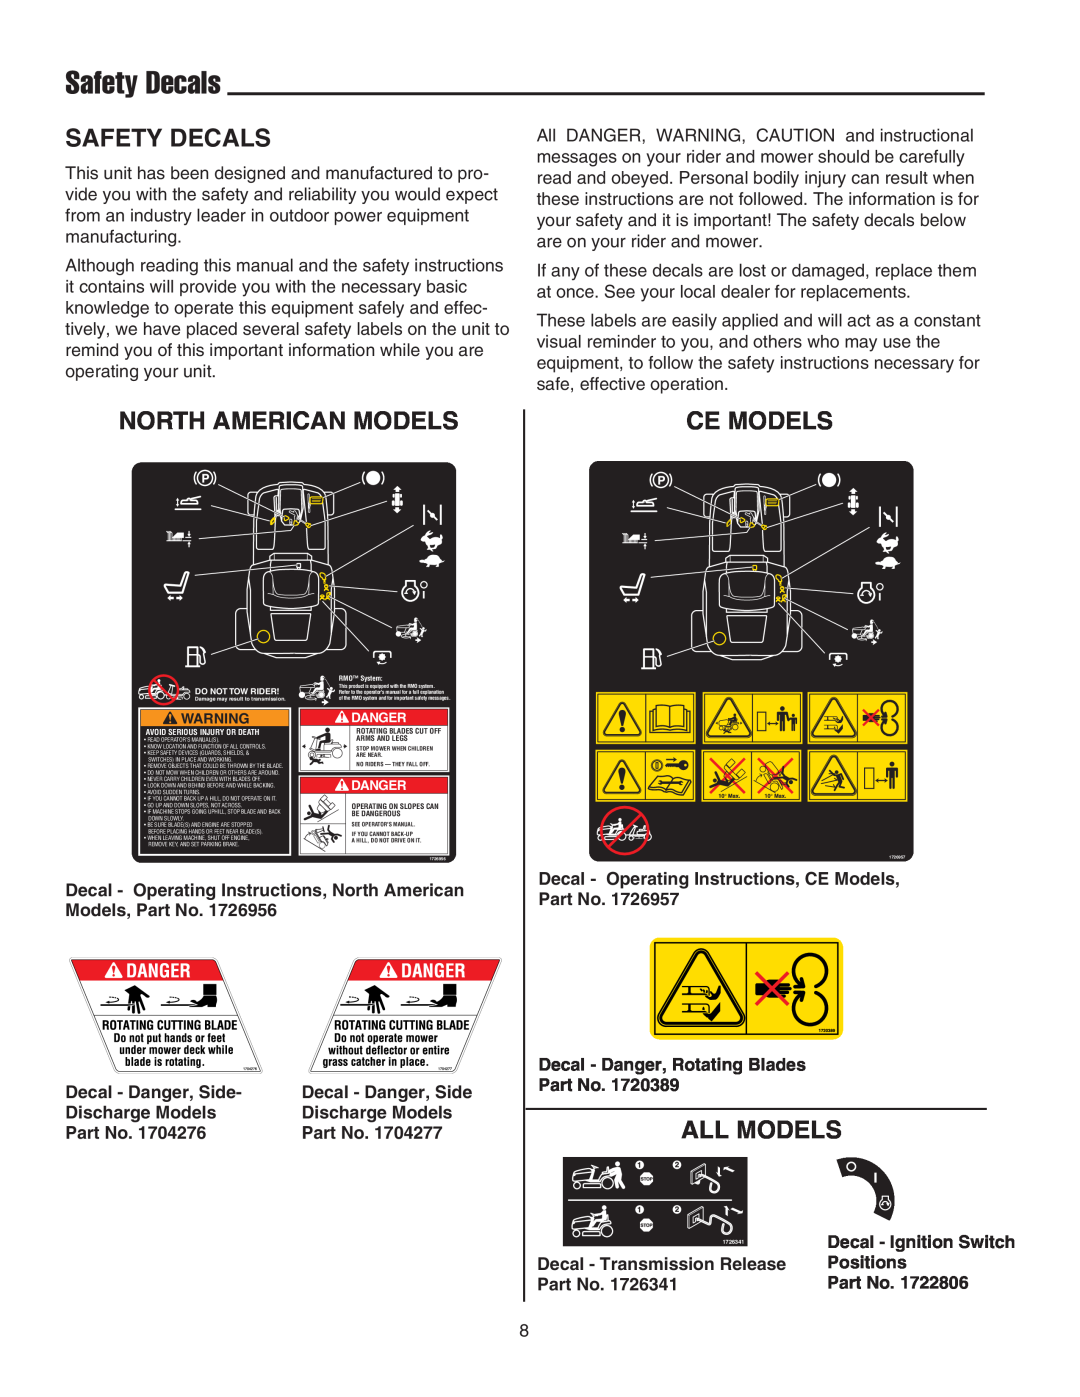 Snapper 400 Series manual Safety Decals, North American Models, Ce Models, All Models 